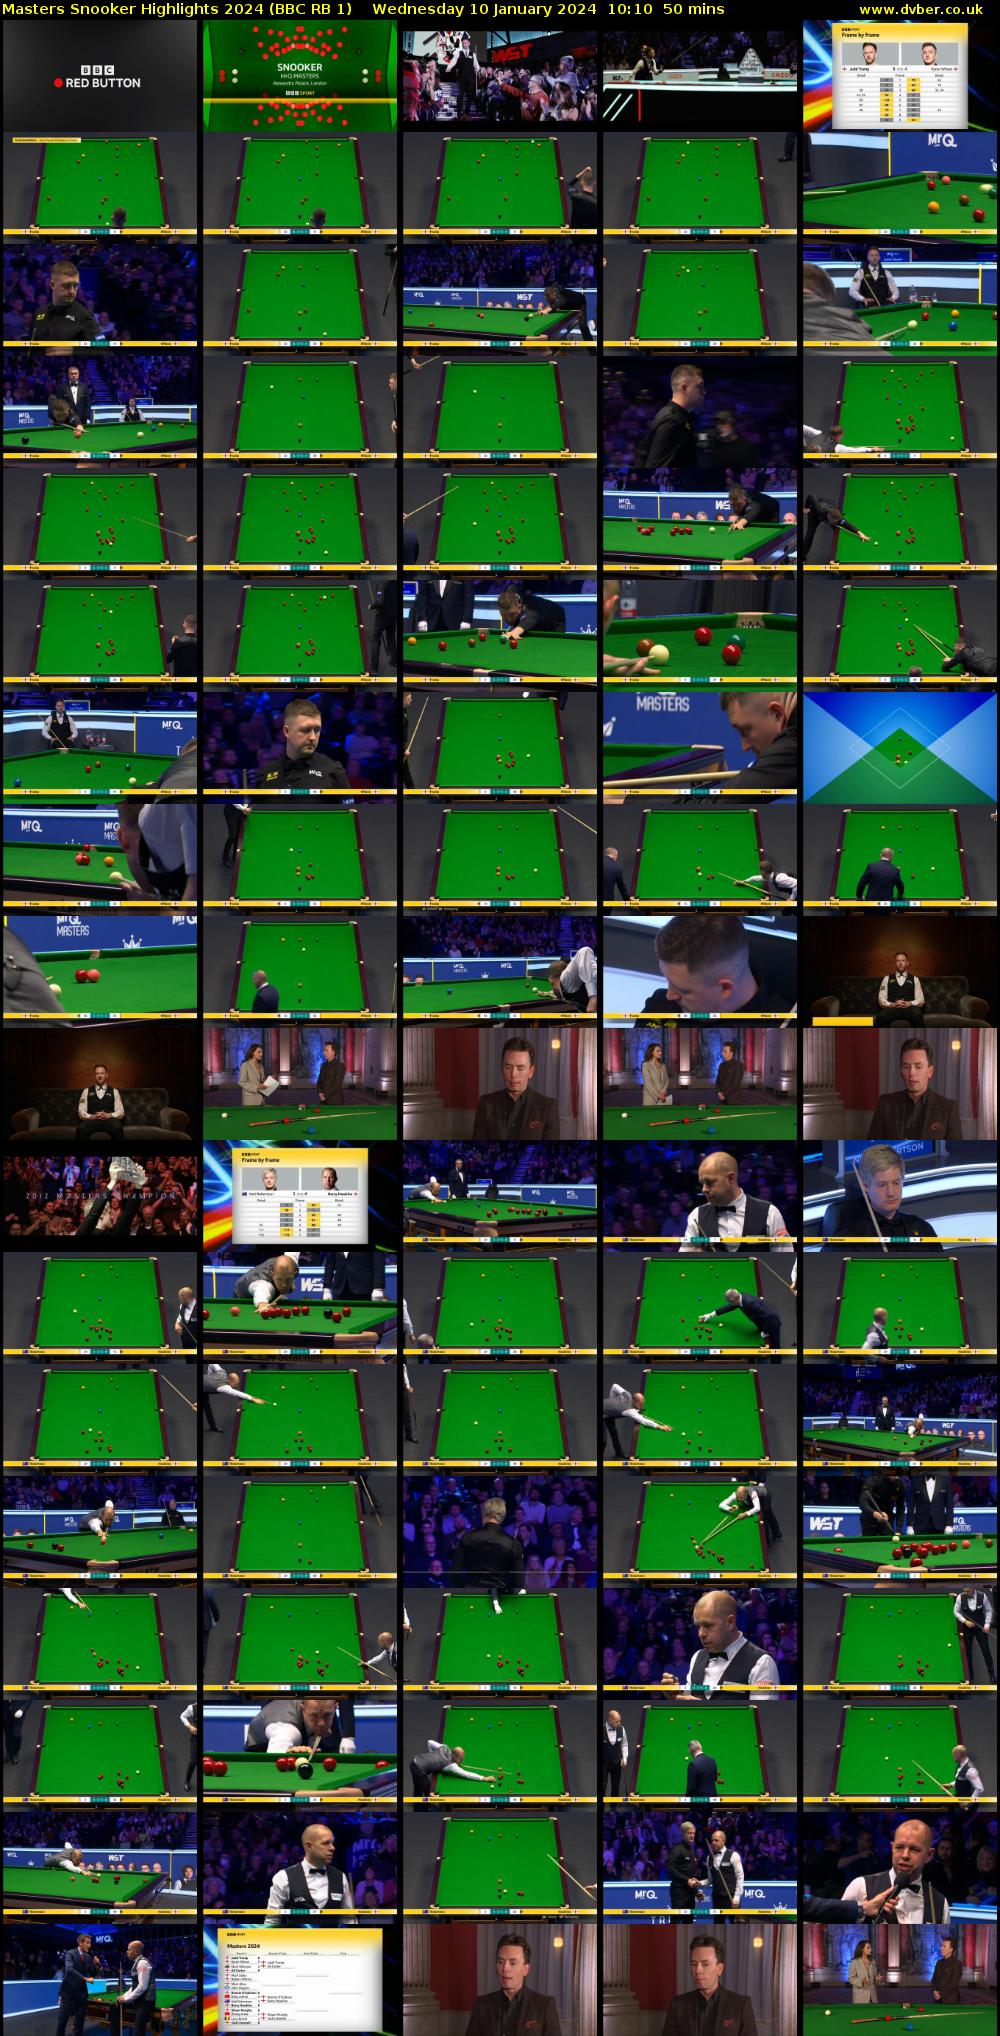 Masters Snooker Highlights 2024 (BBC RB 1) Wednesday 10 January 2024 10:10 - 11:00